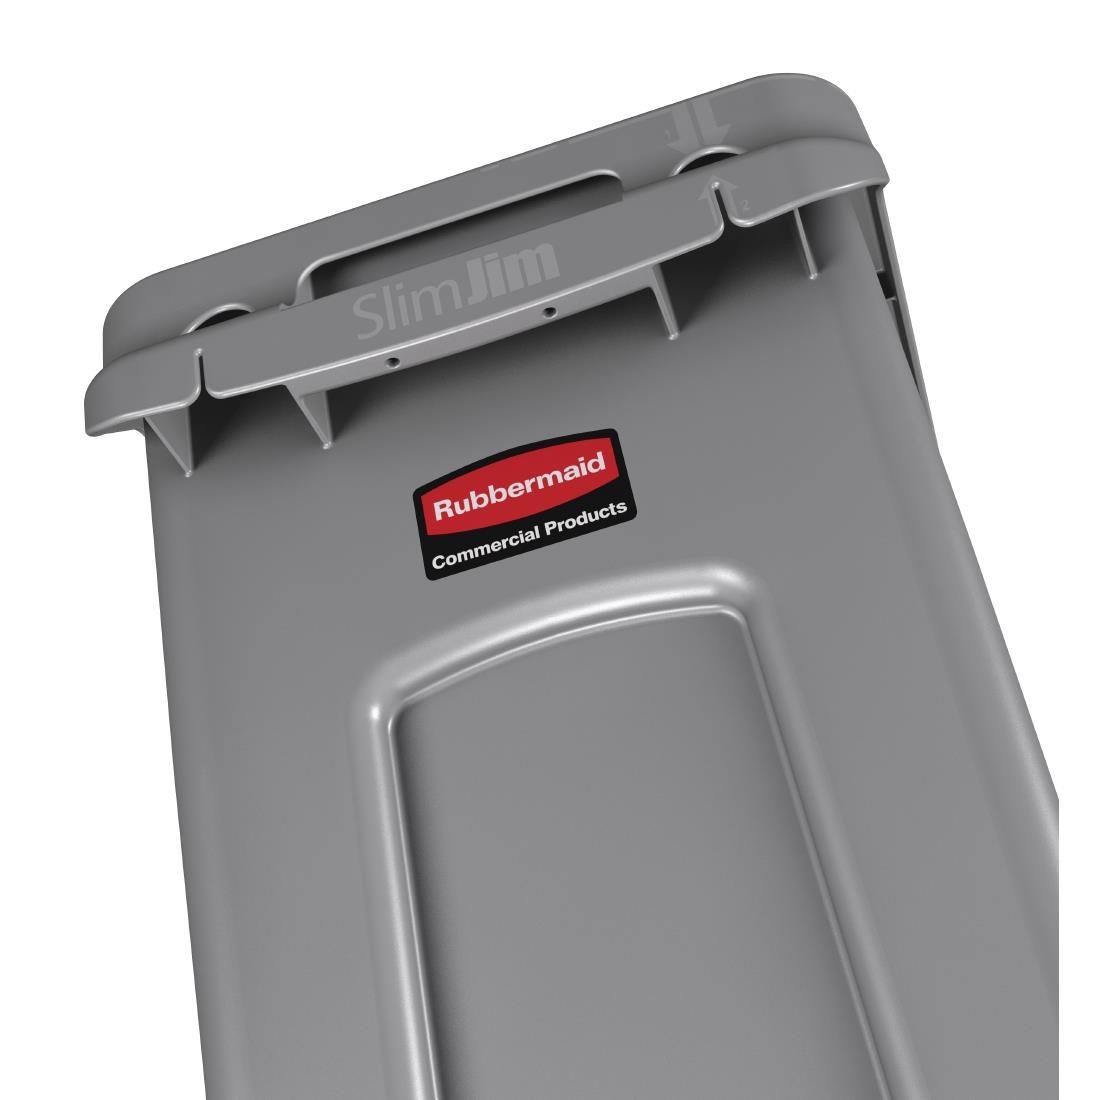 Rubbermaid Slim Jim Container With Venting Channels Grey 60Ltr - F603  - 5